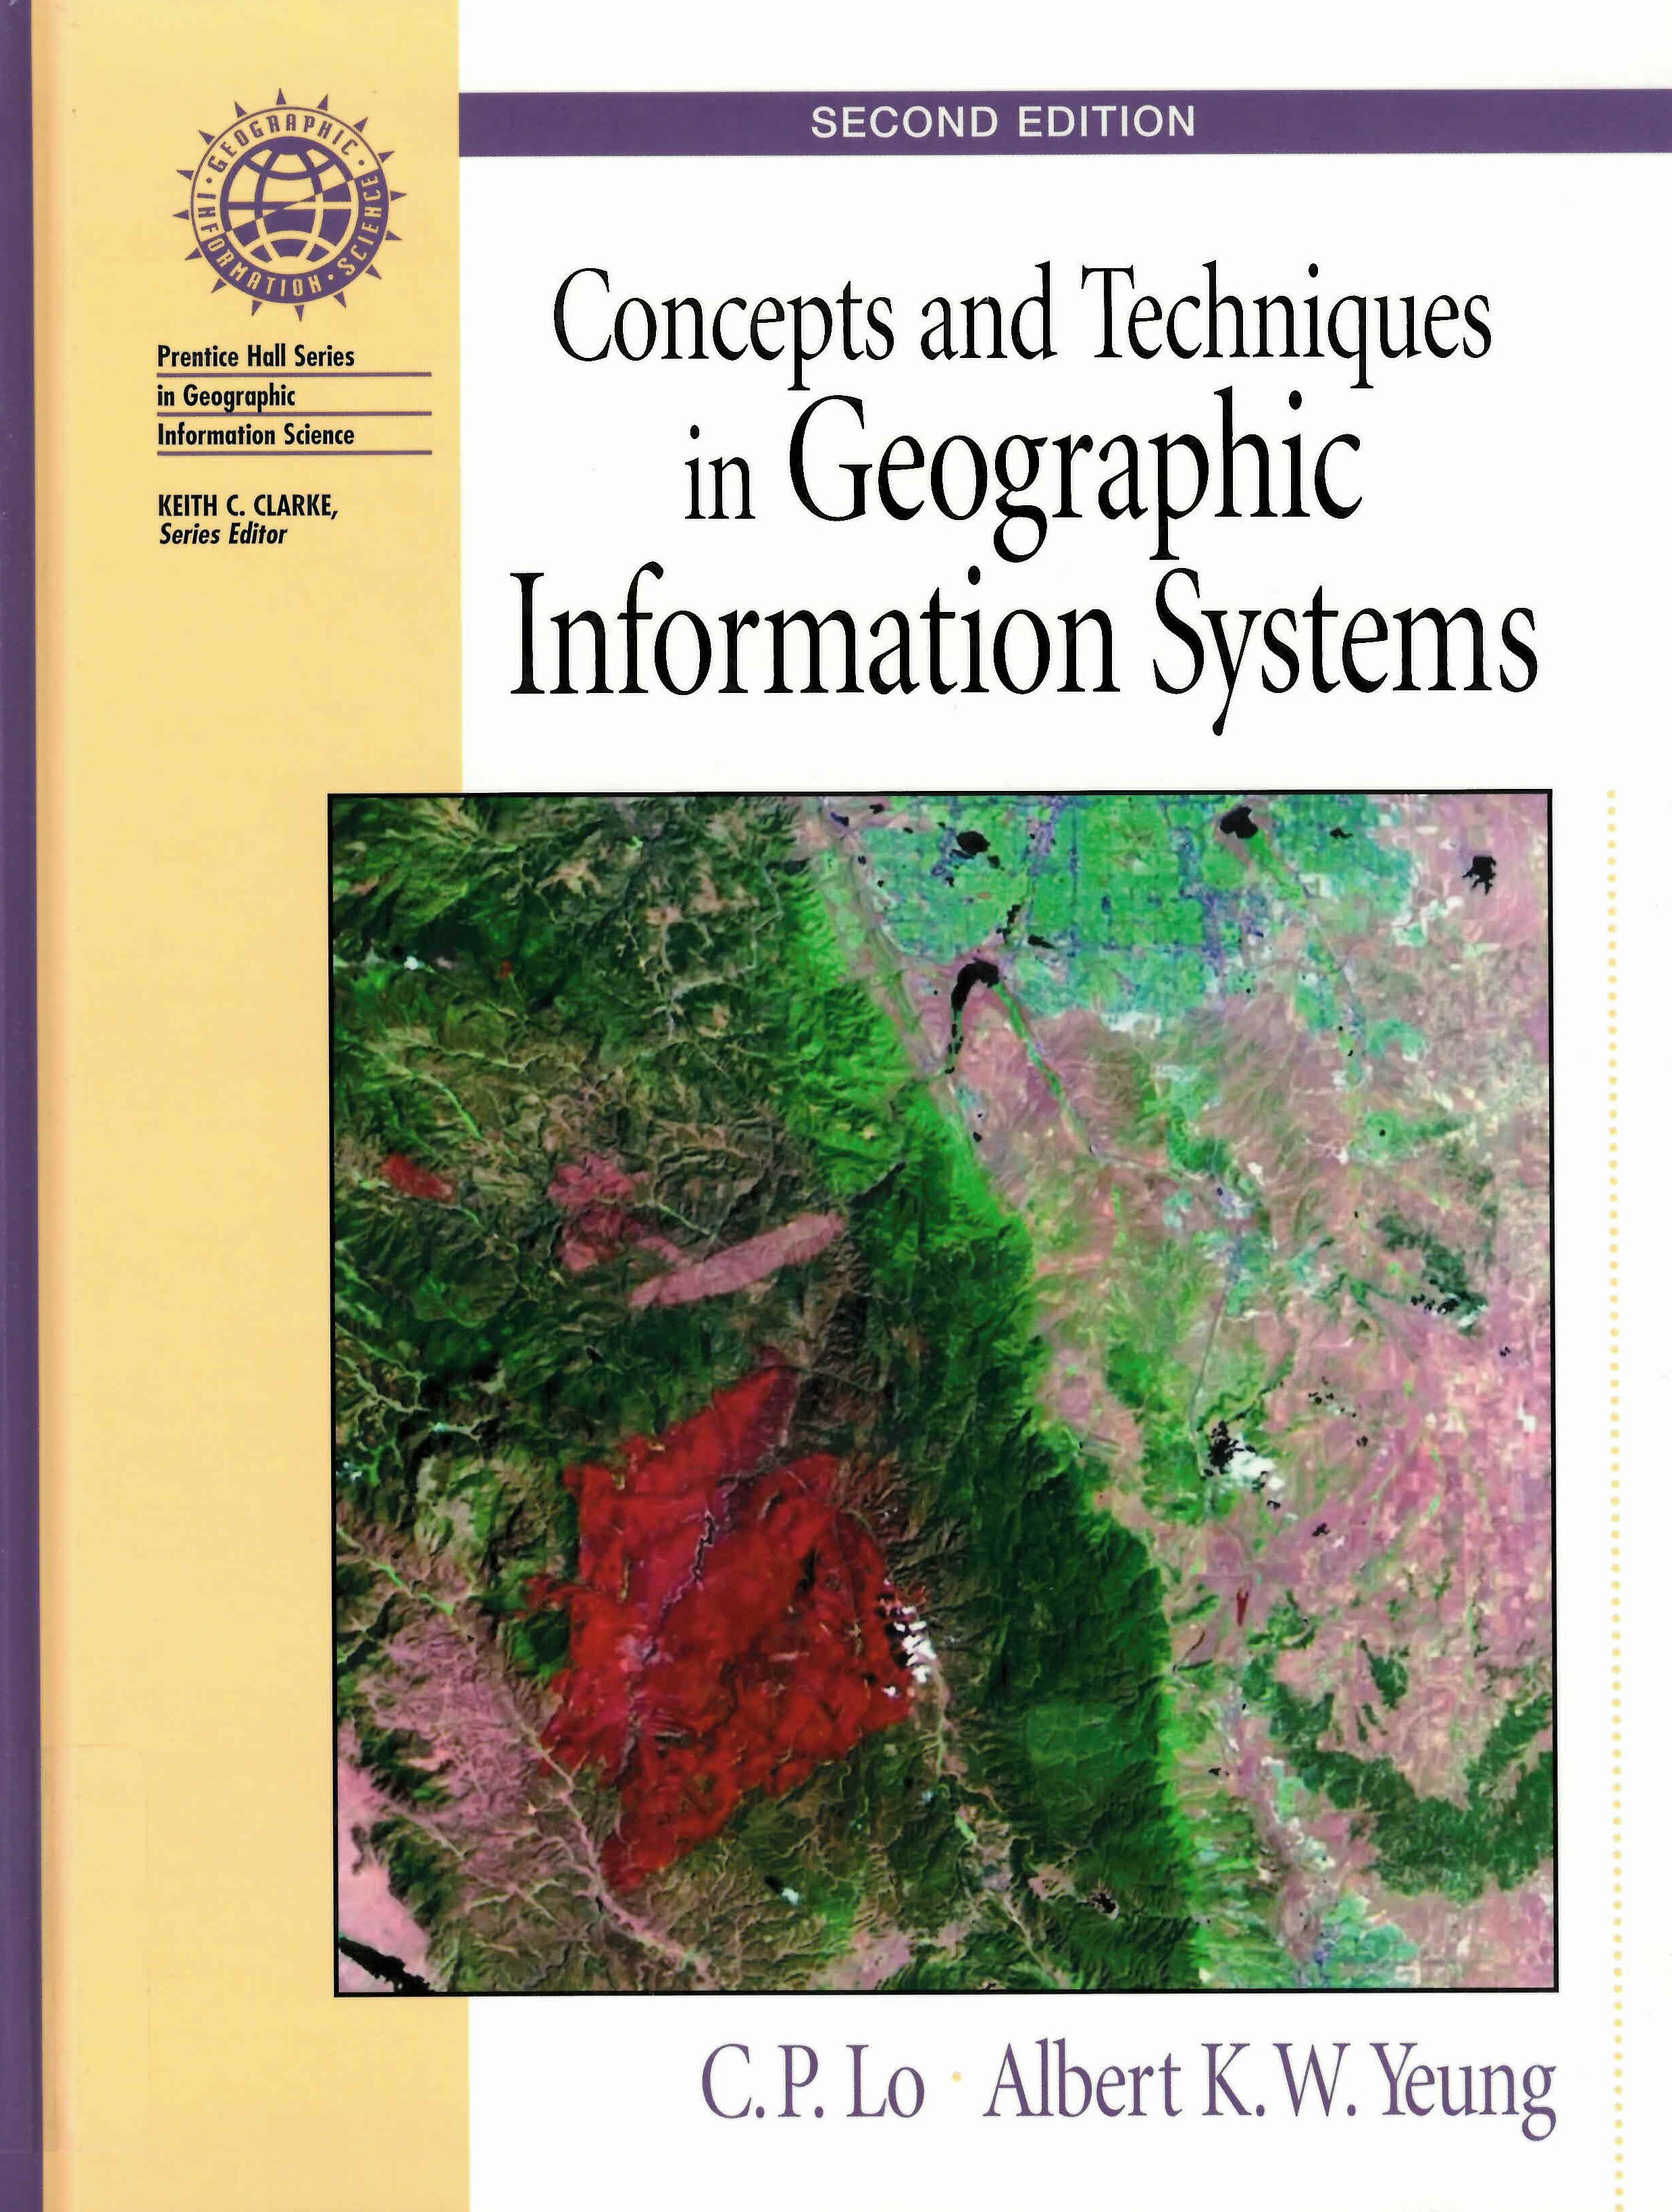 Concepts and techniques of geographic information systems